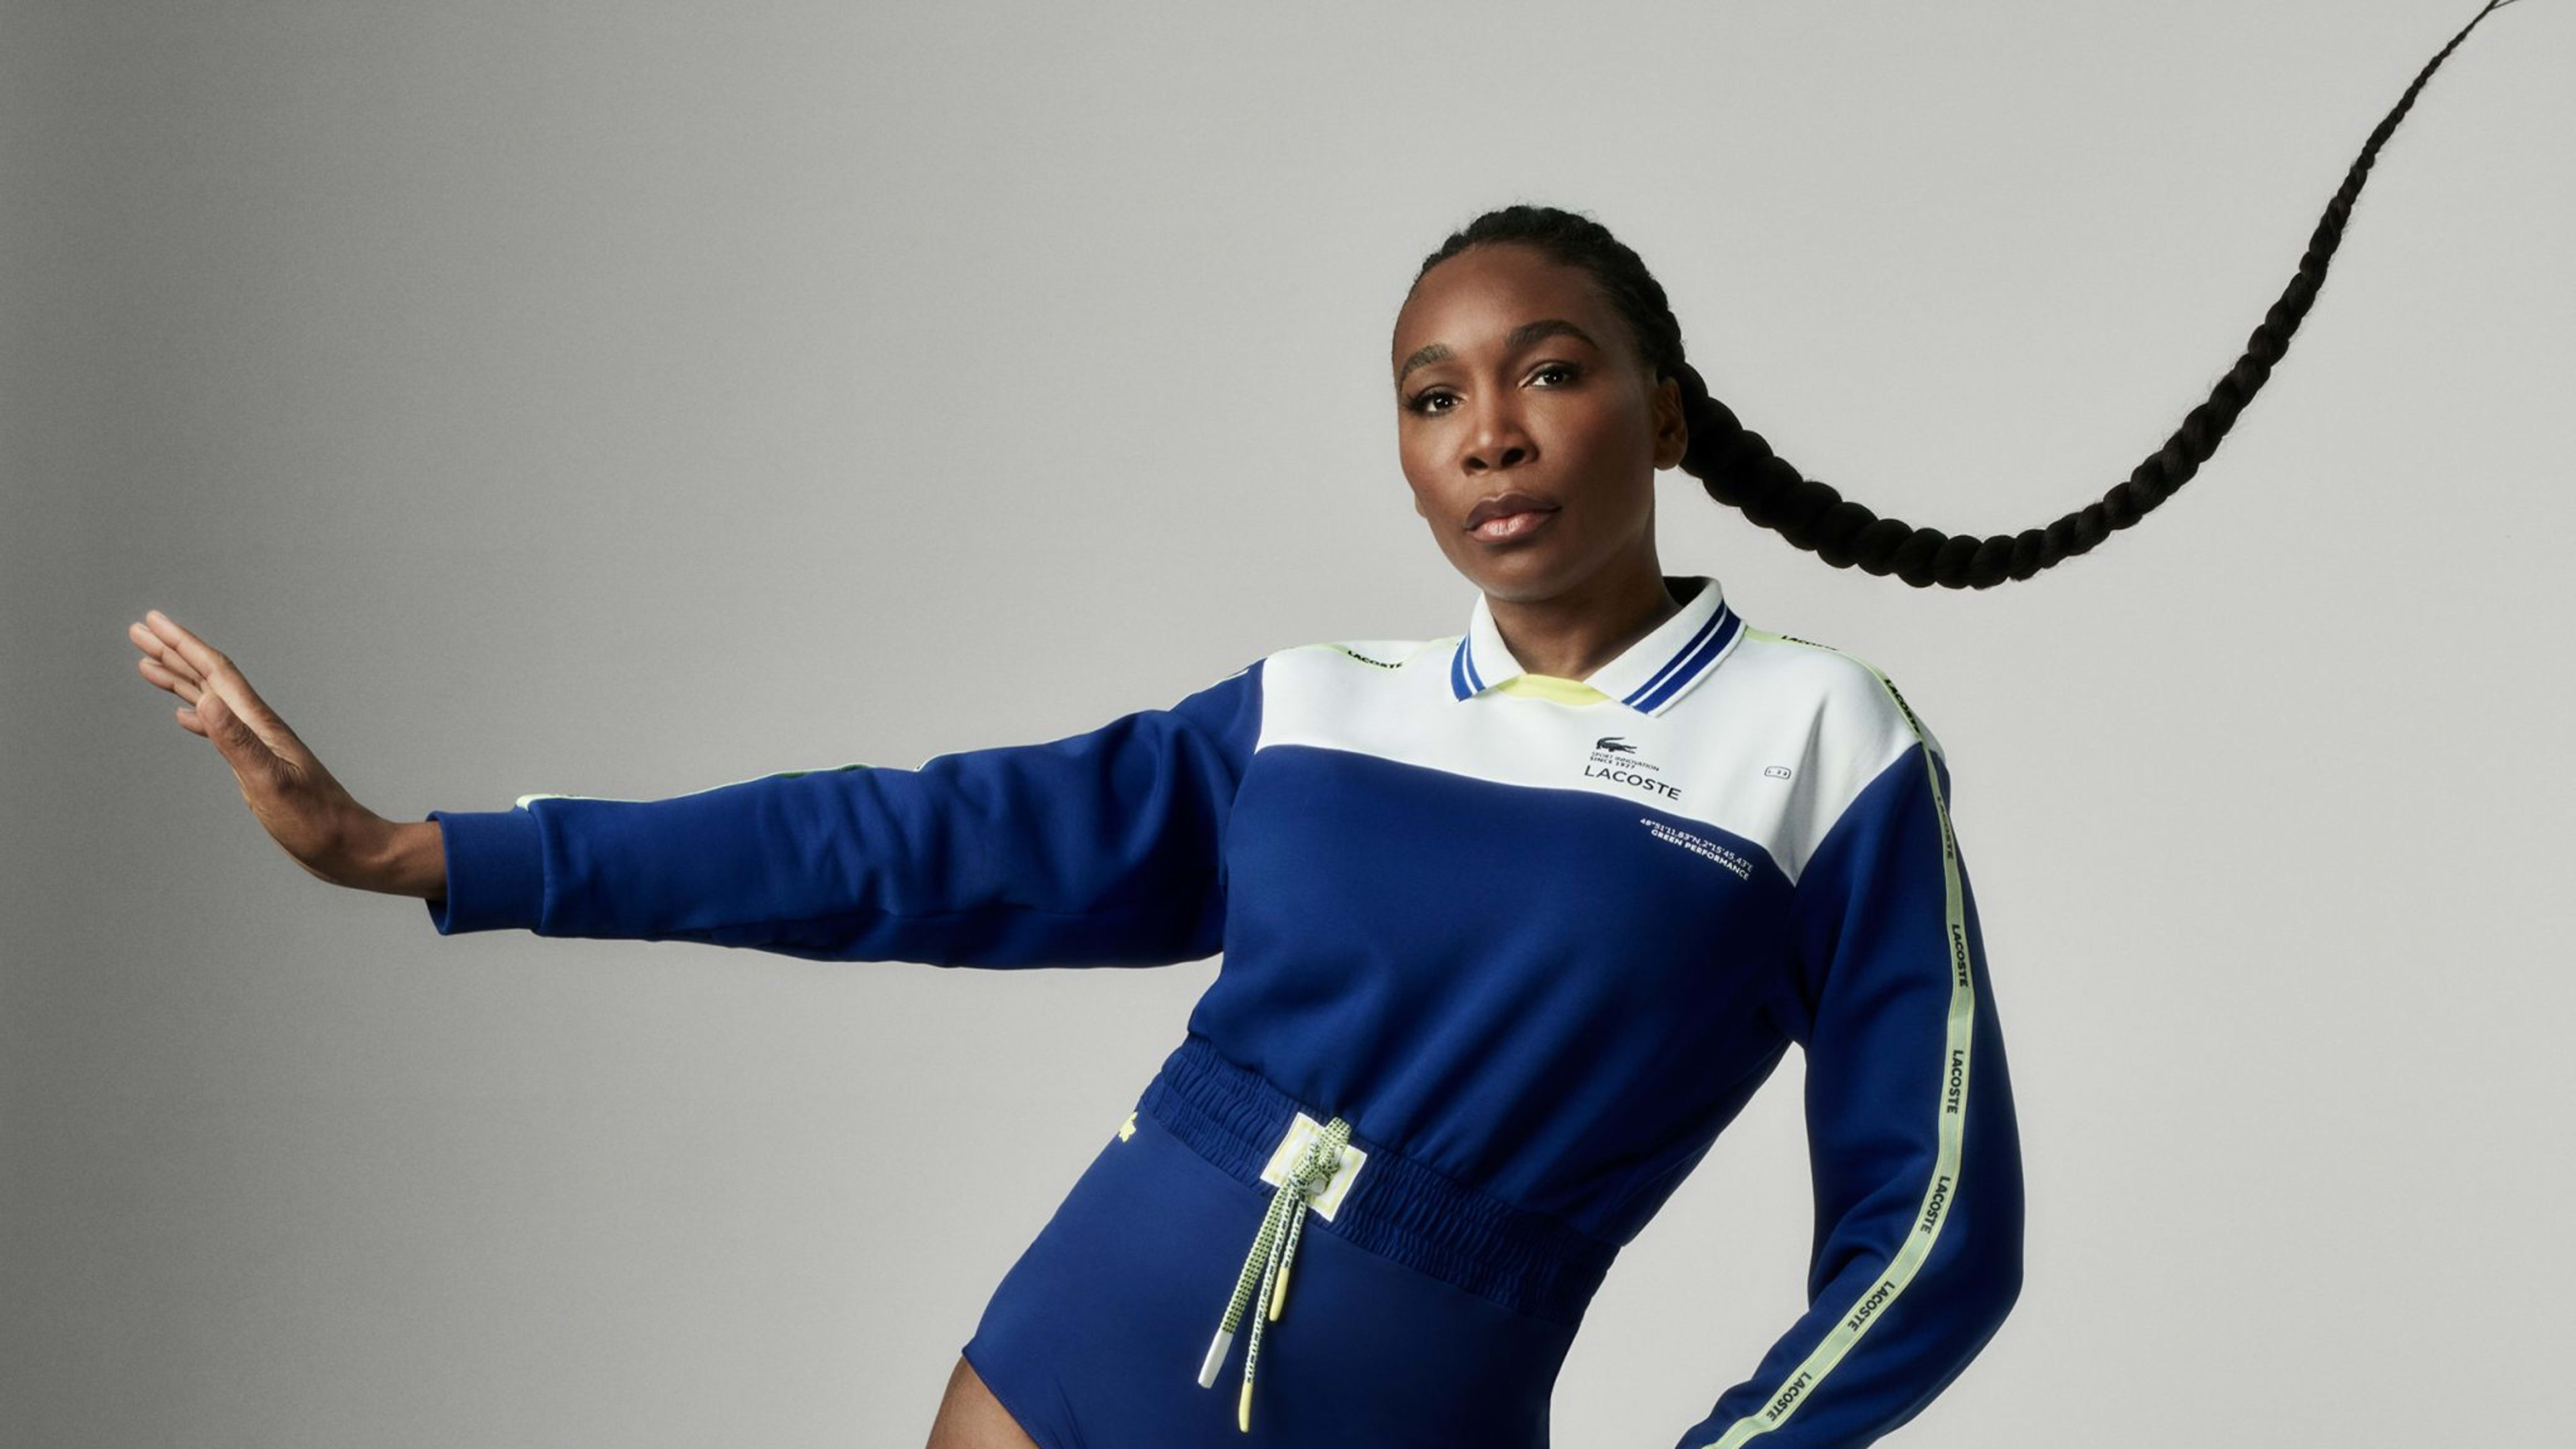 Points: Lacoste into its roots Venus Williams as global ambassador